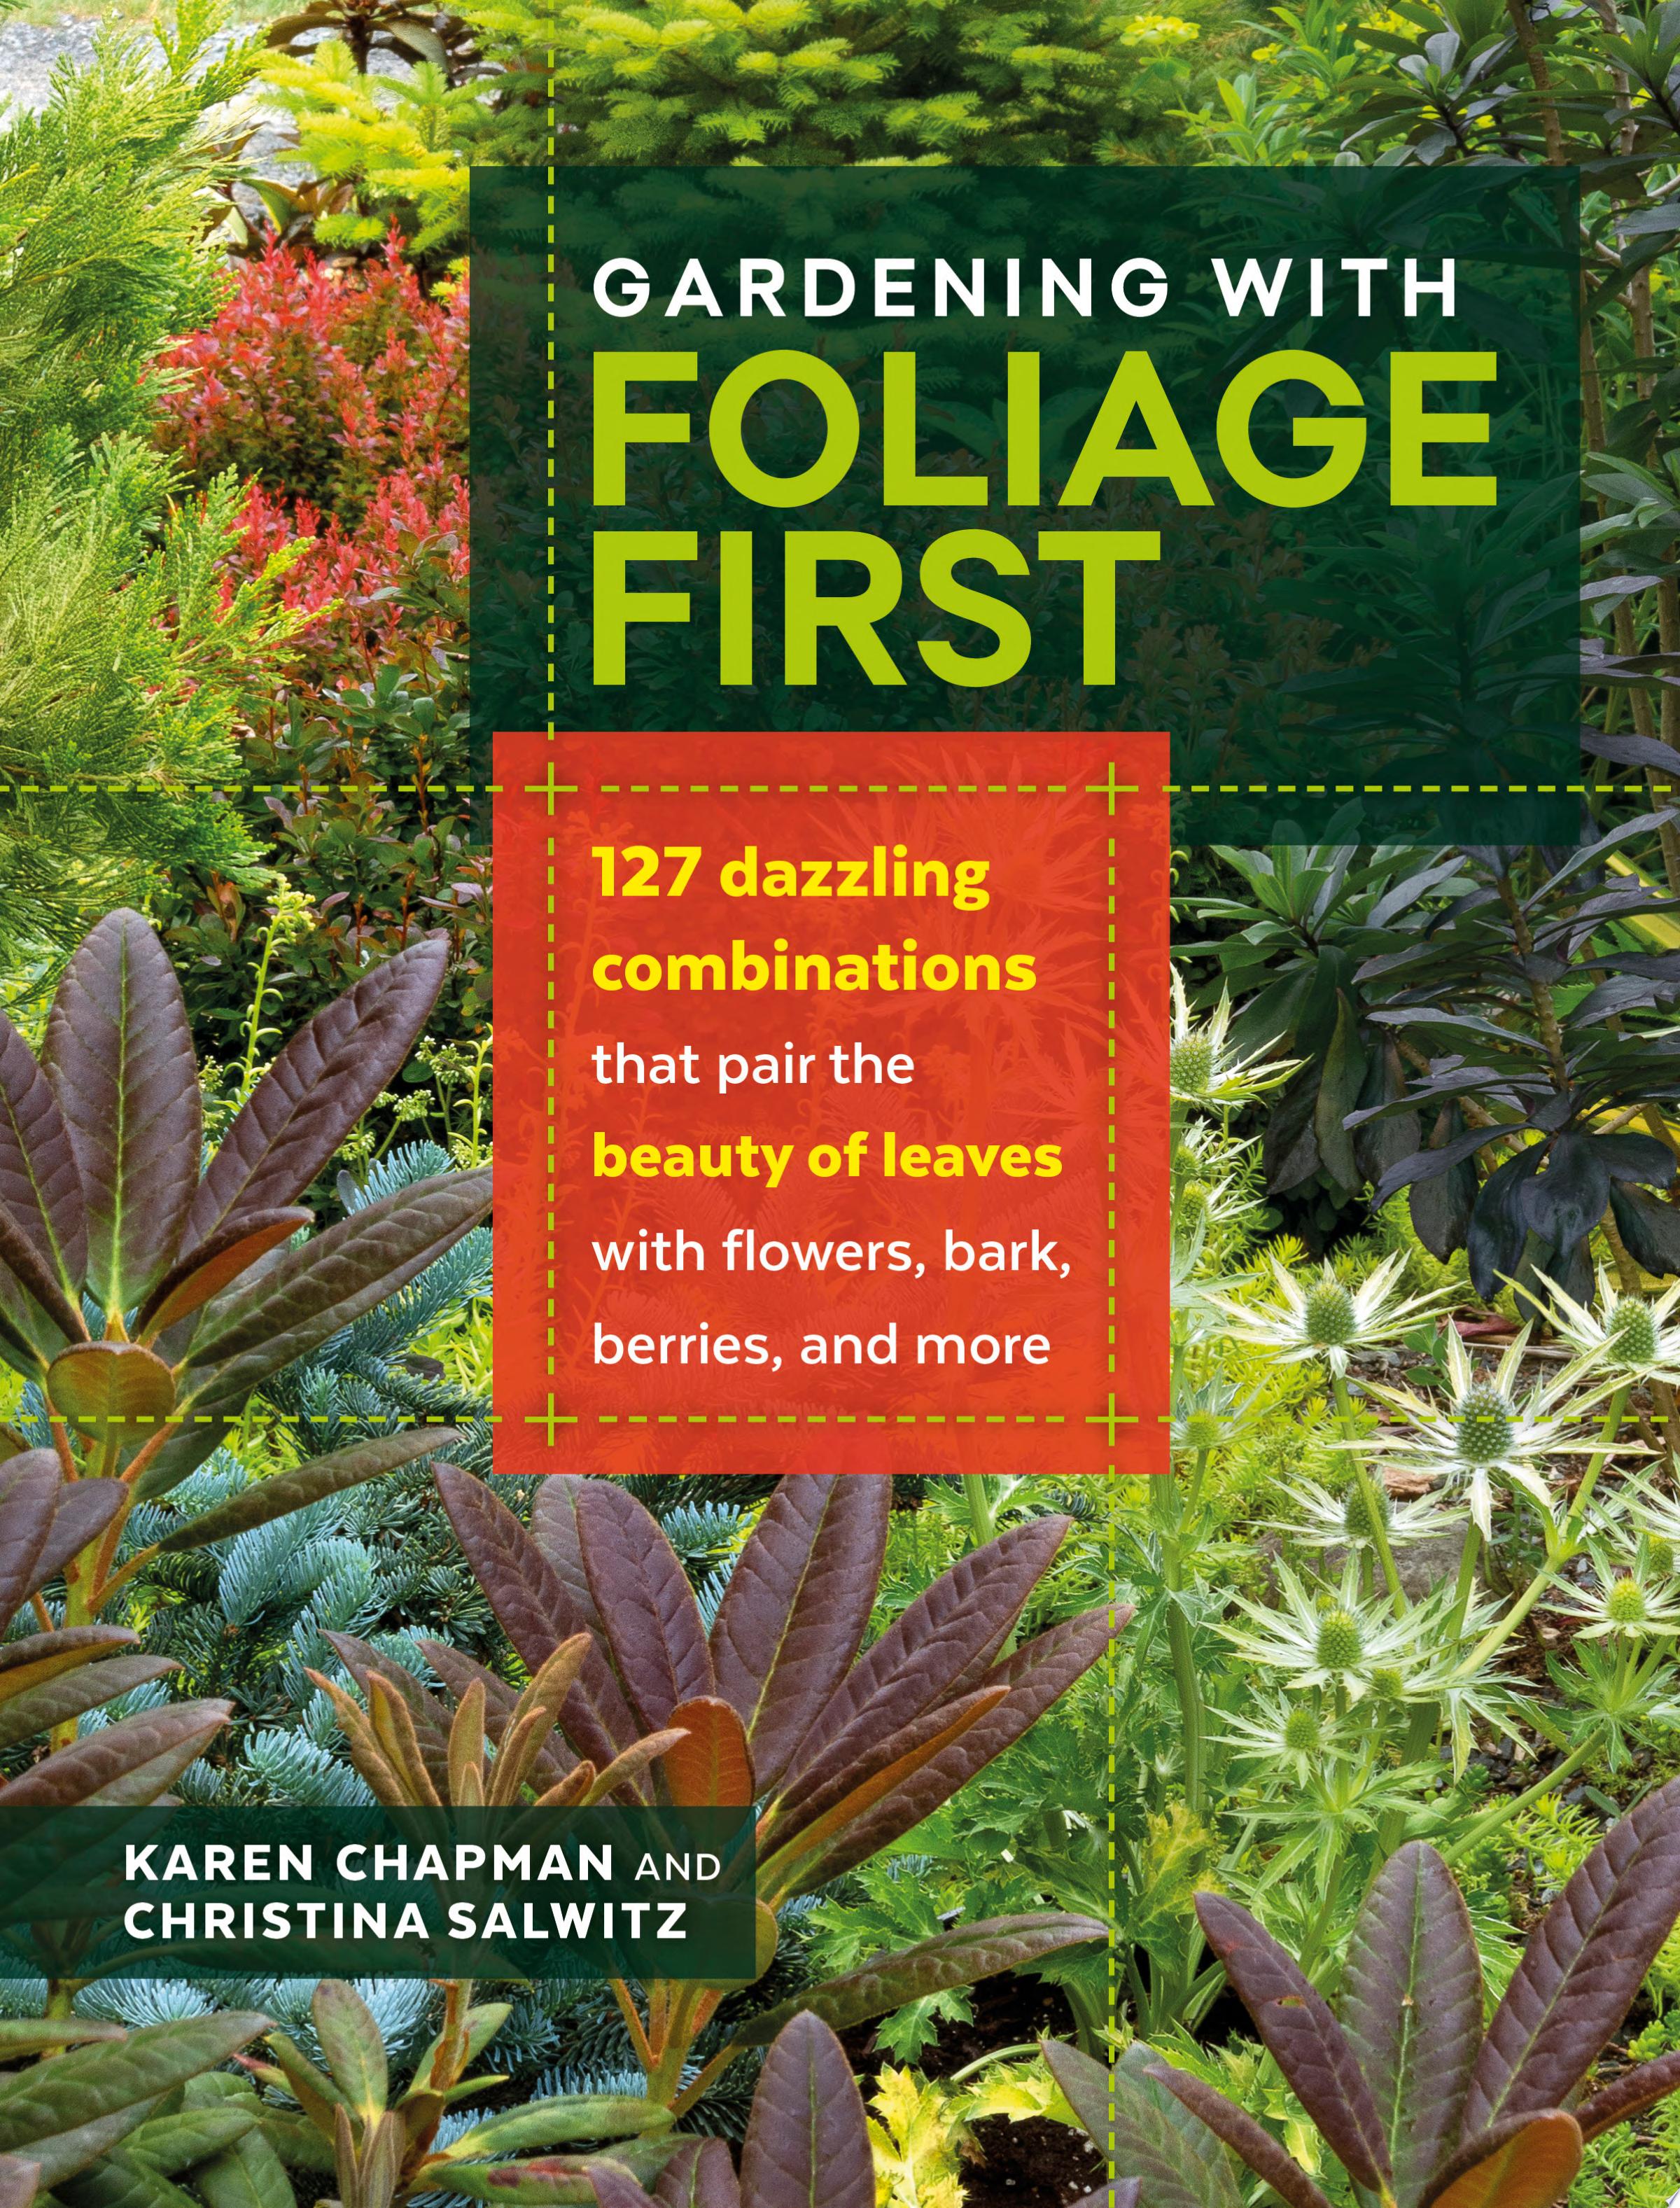 Image for "Gardening with Foliage First"